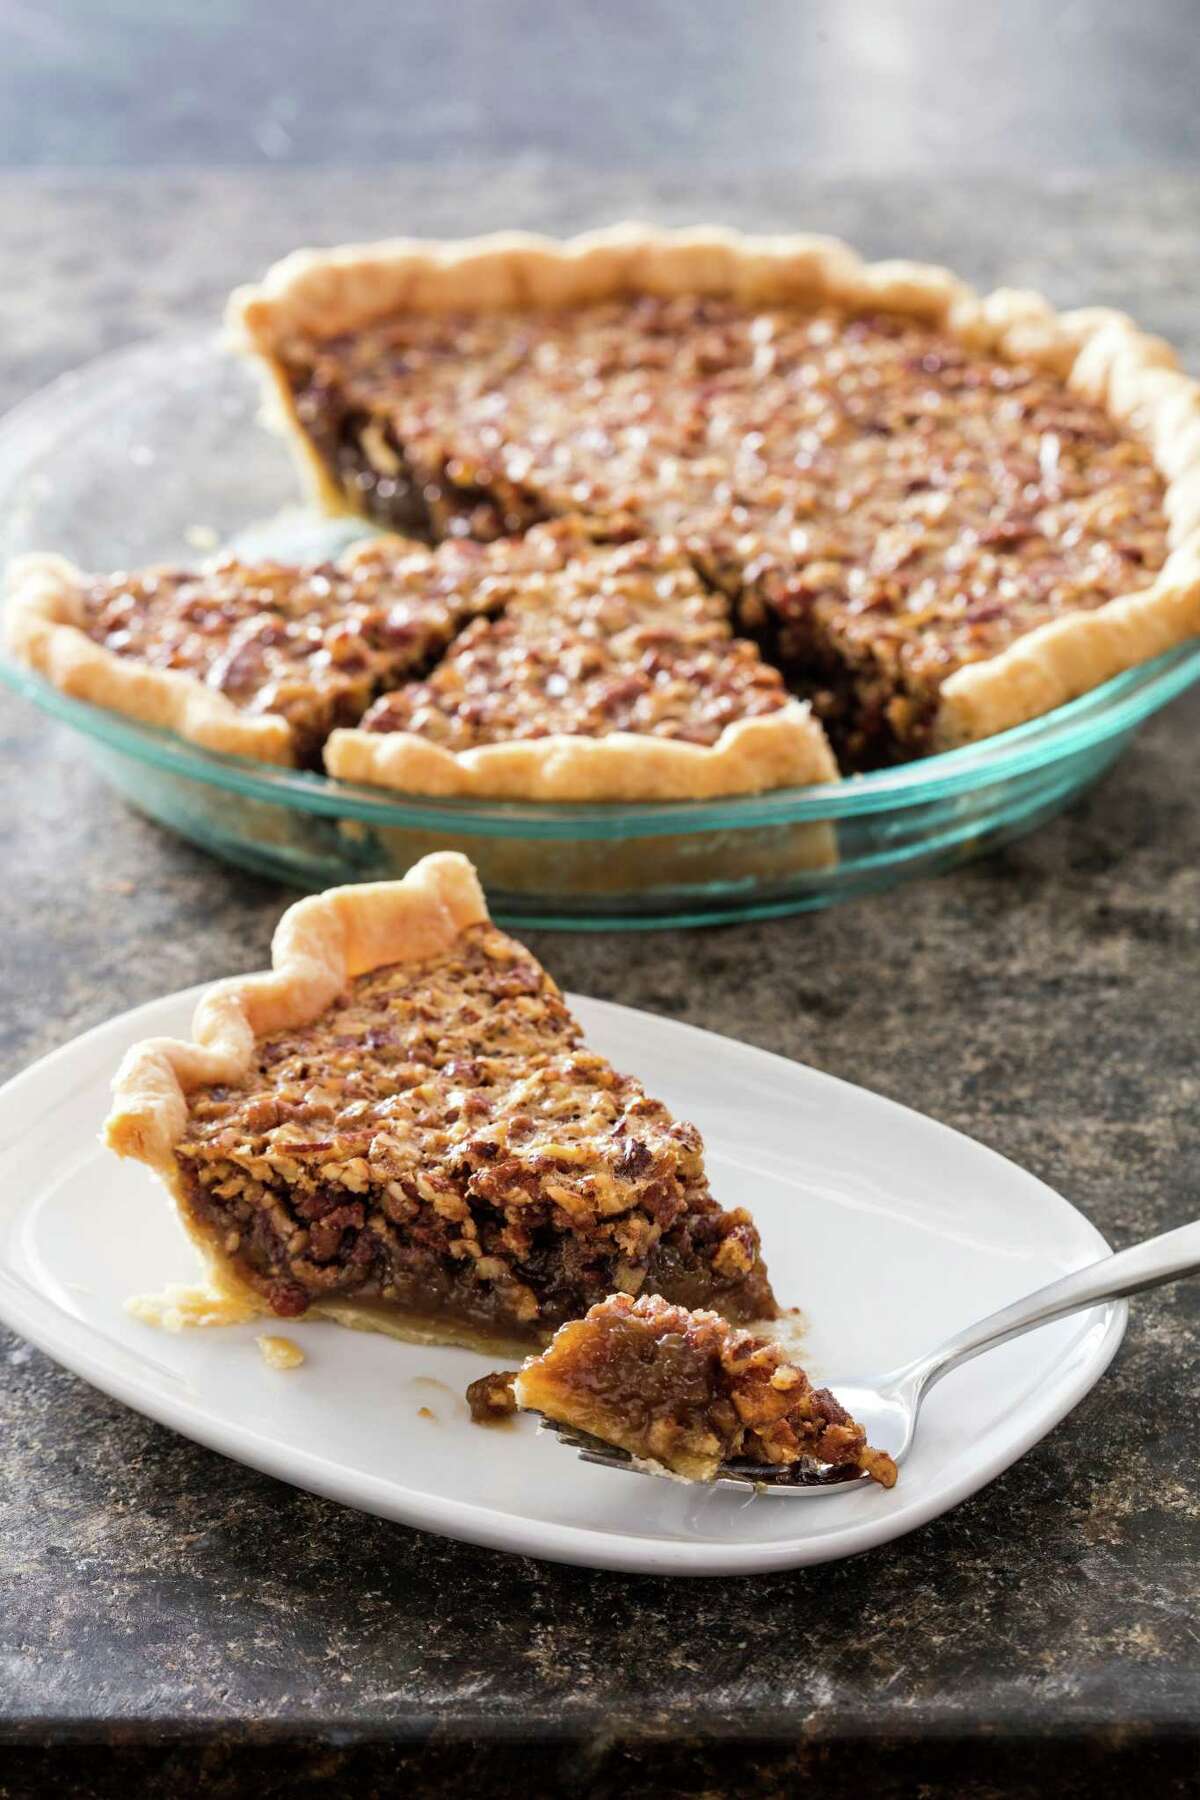 Pecan Pie from "Cooking at Home with Bridget & Julia" from America's Test Kitchen.